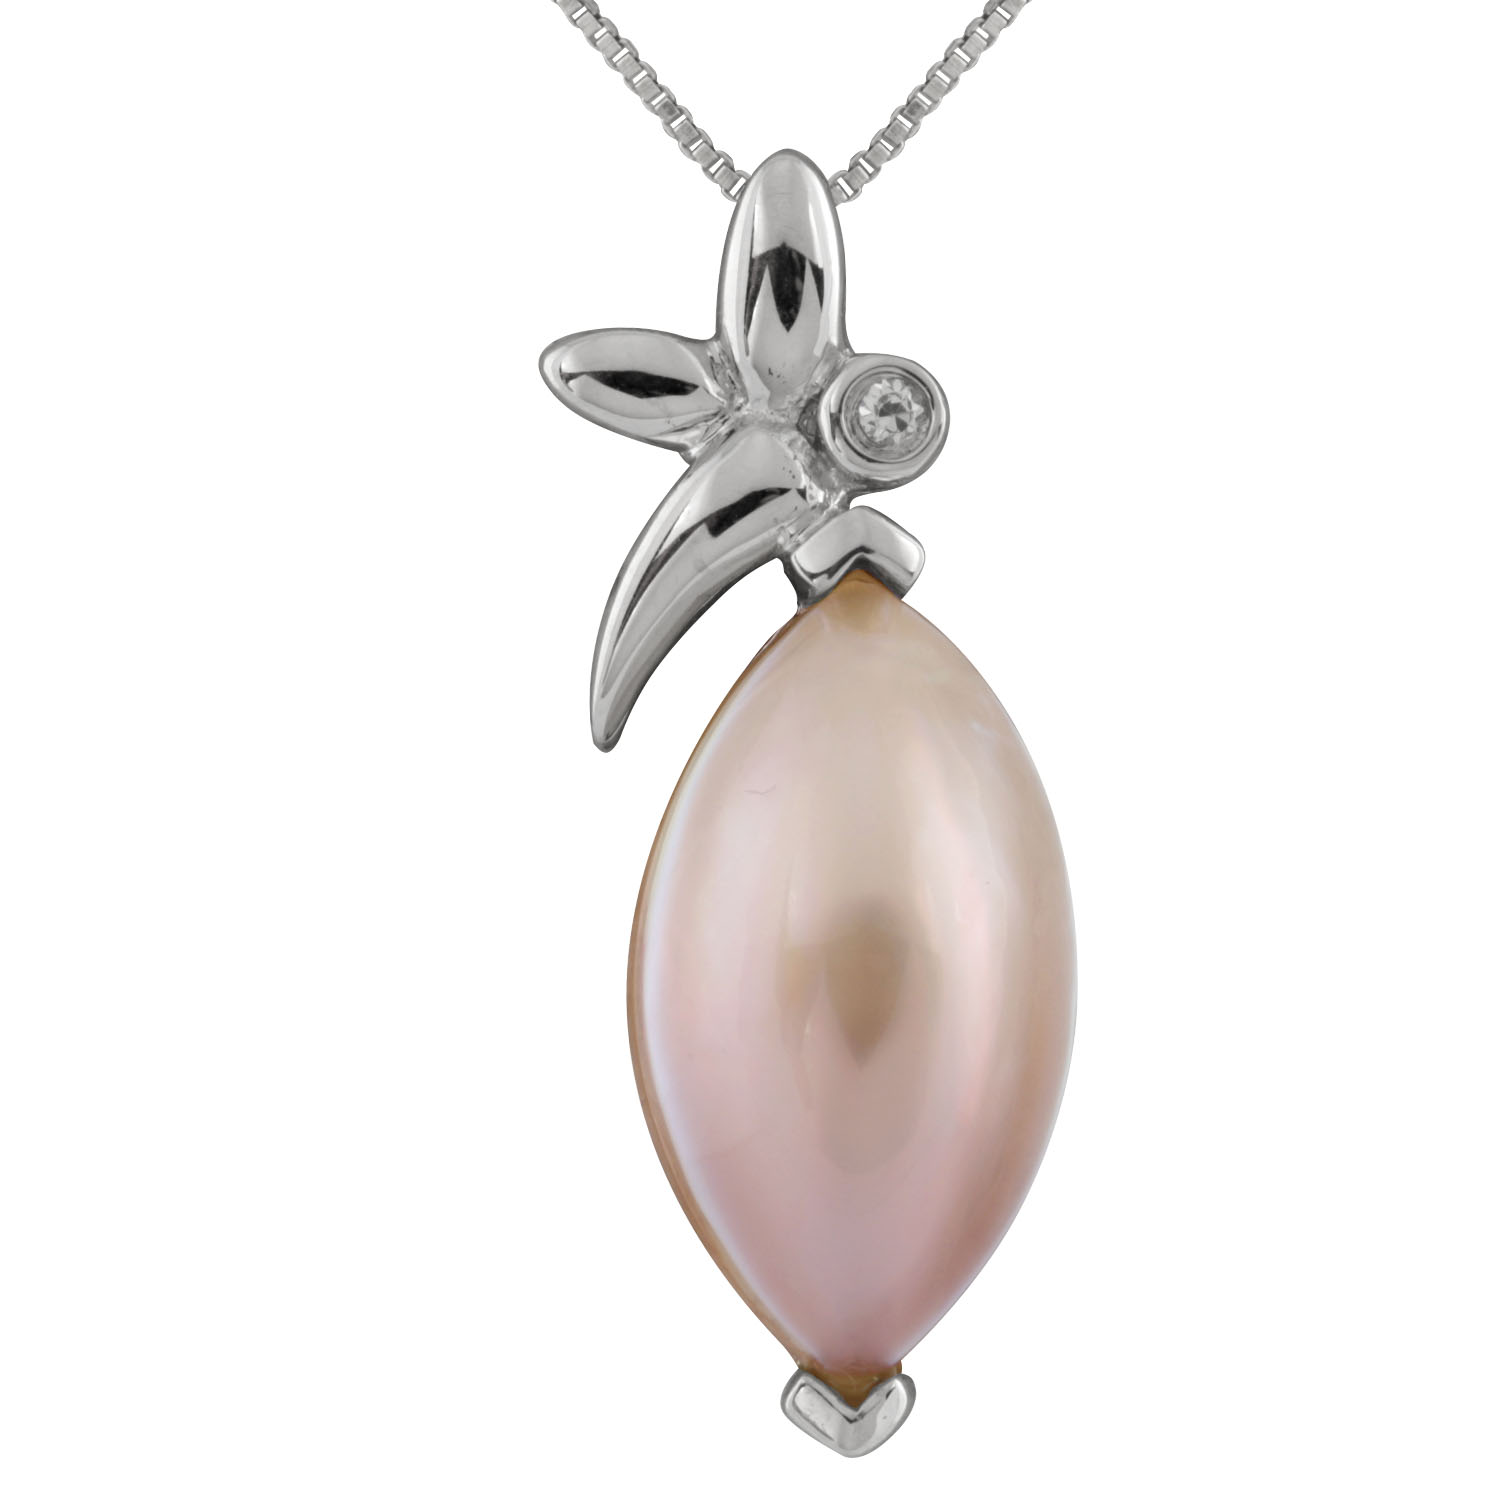 New Sterling Silver pendant with mabe pearl